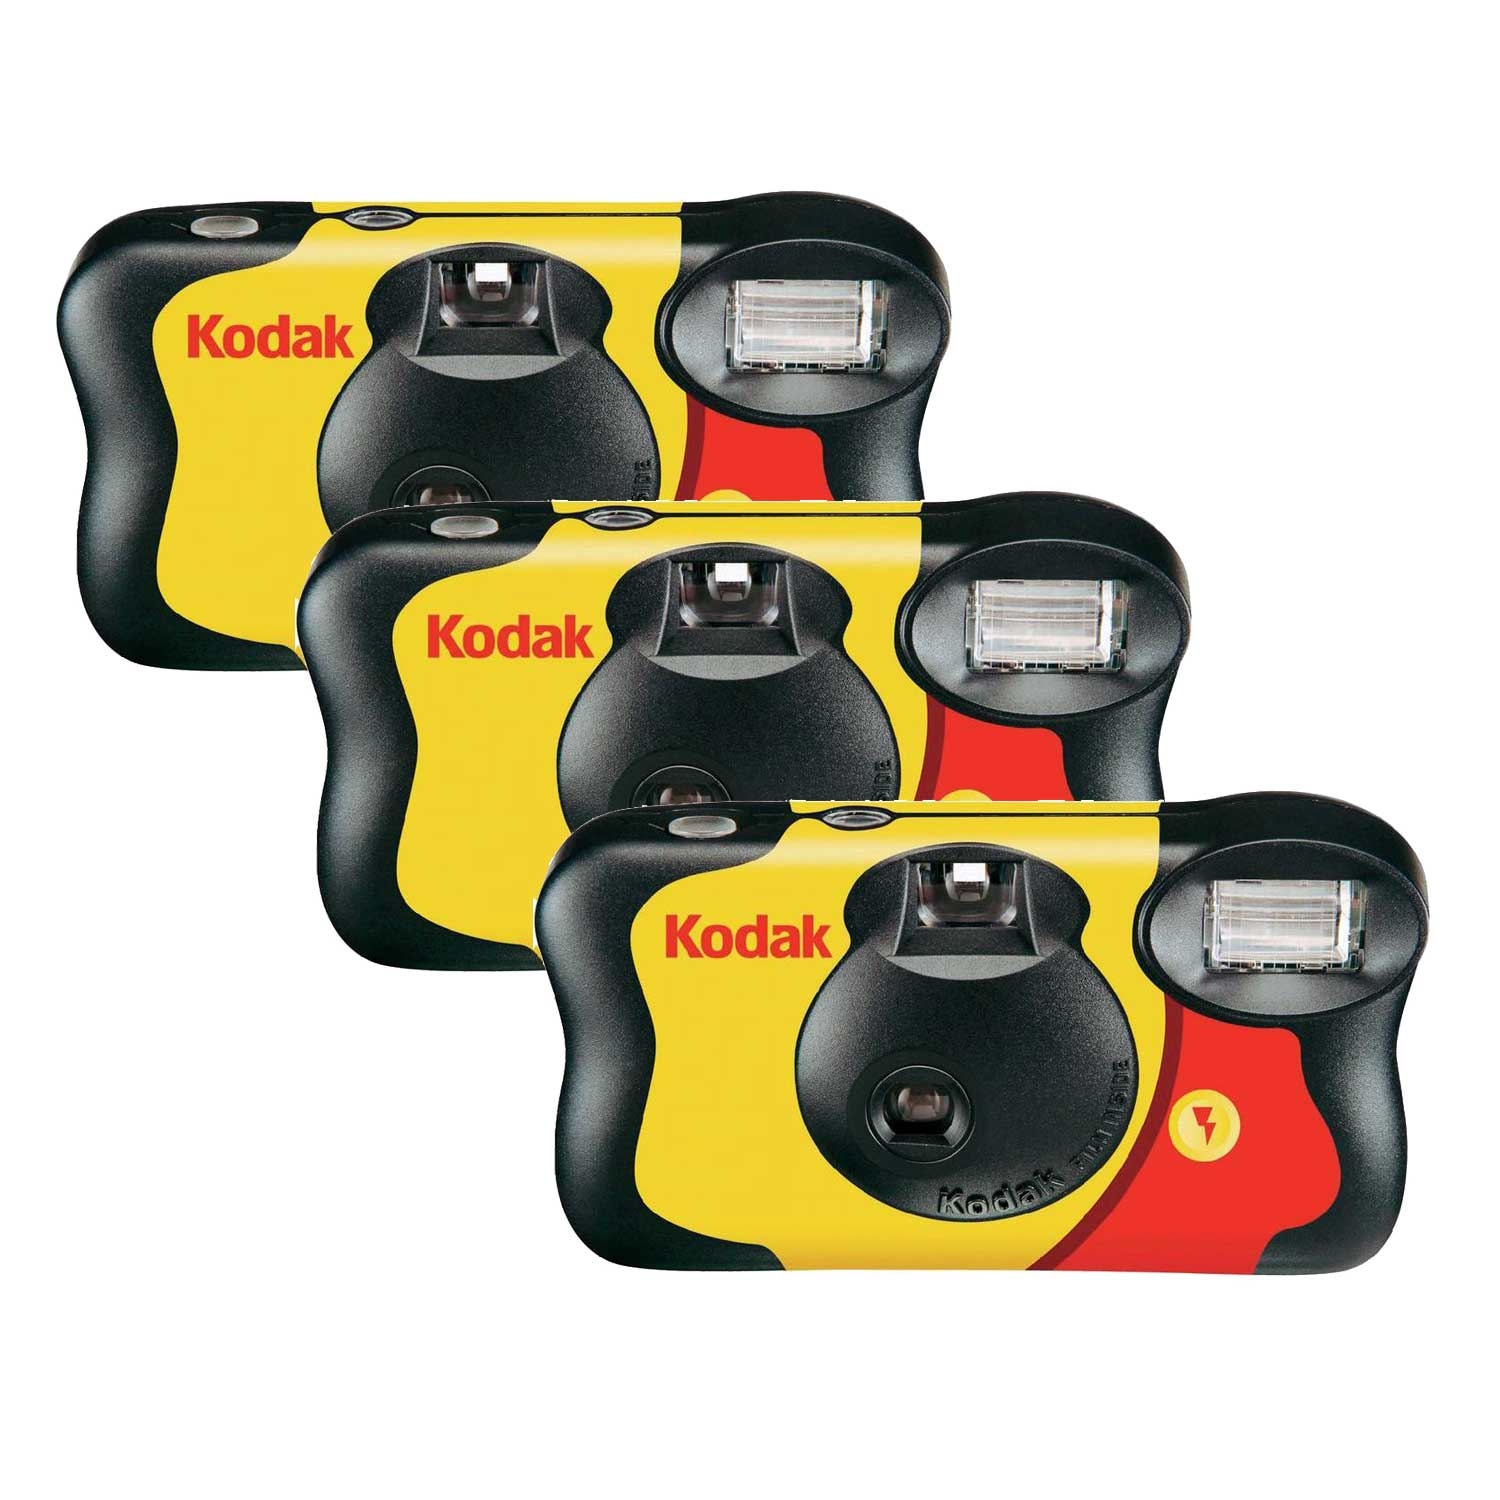 Kodak Fun Saver Disposable Single Use Camera with Flash - 39 Pictures / Exposures - Value 3 Pack